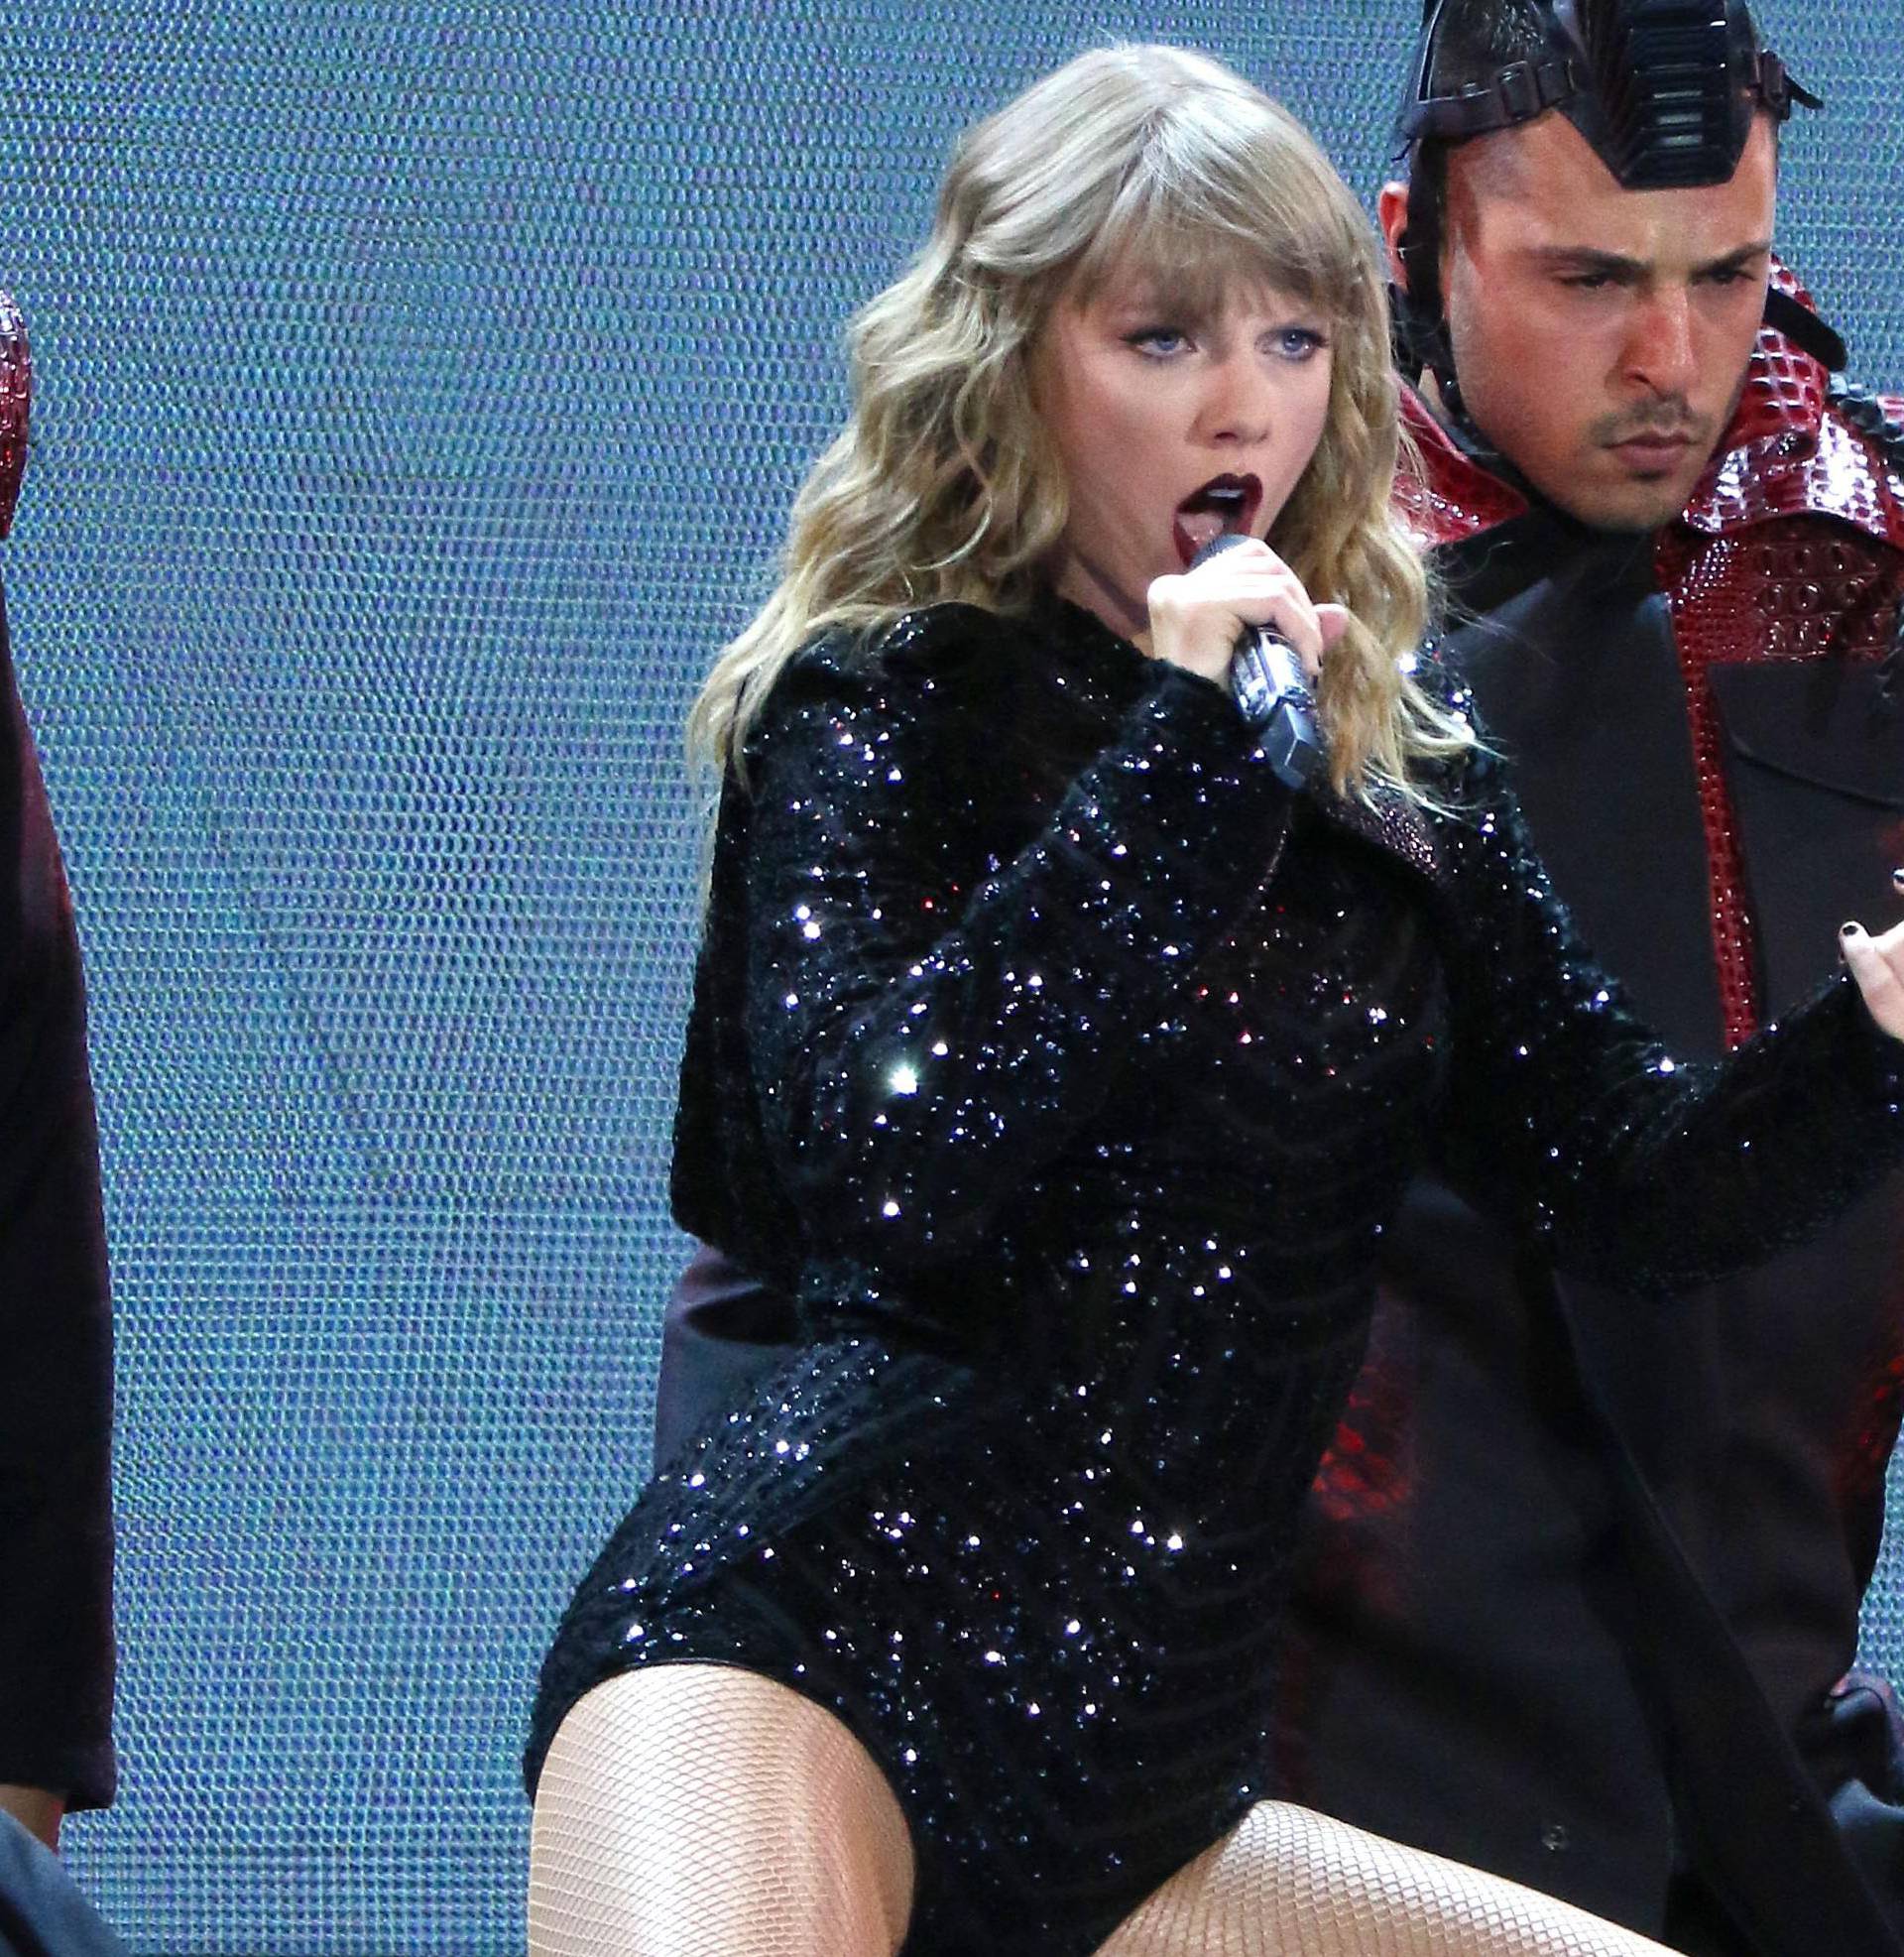 Taylor Swift in concert - New Jersey